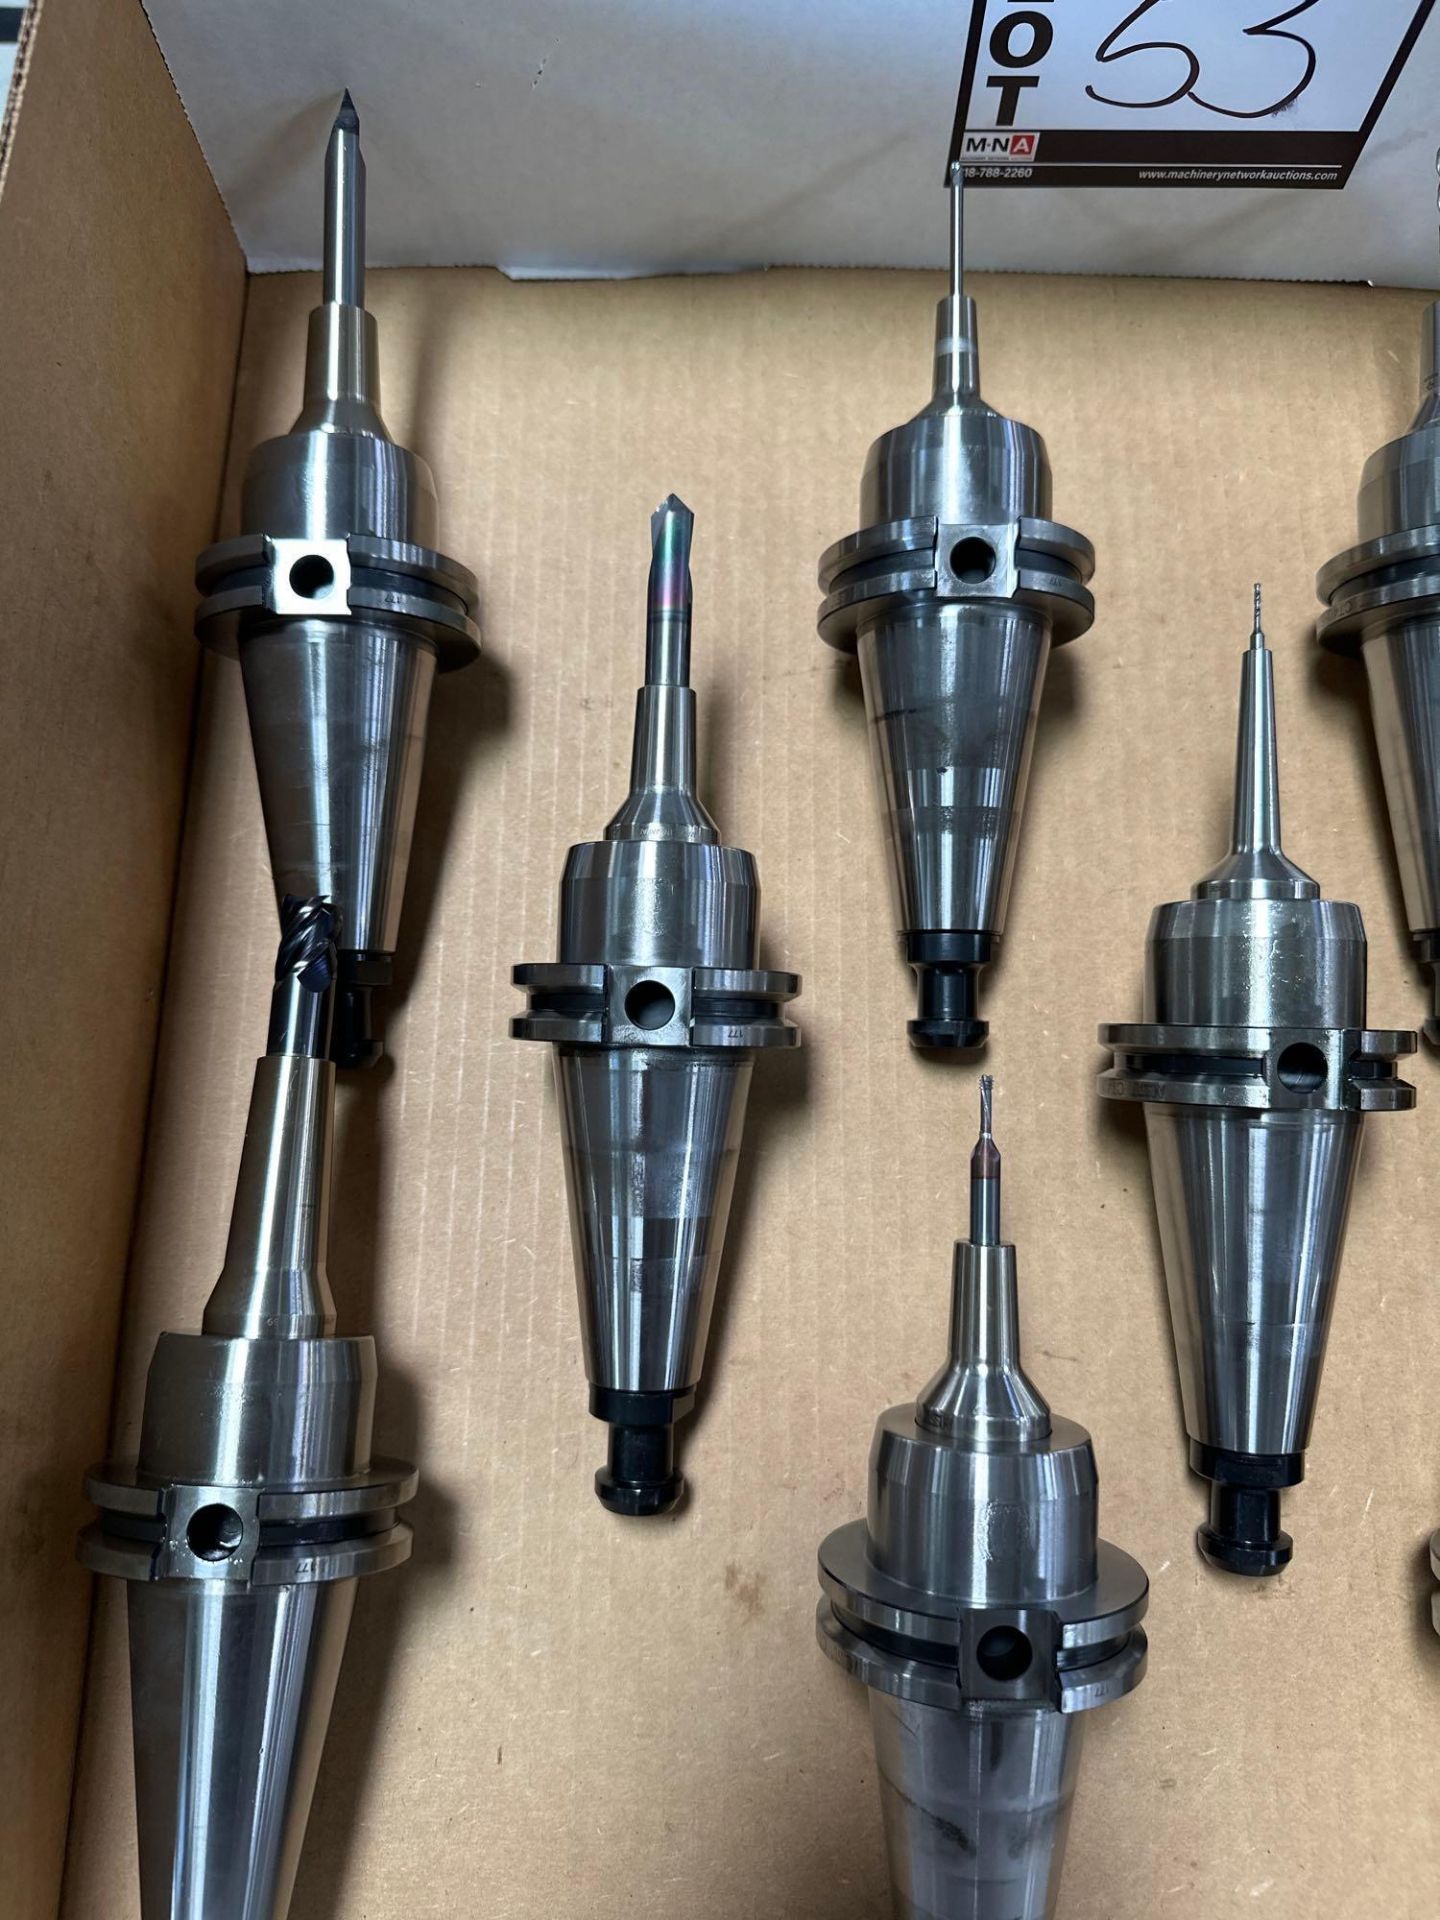 (11) MST CT-40 Shrink Fit Tool Holders w/ Assorted Tooling for Makino A61NX - Image 2 of 4